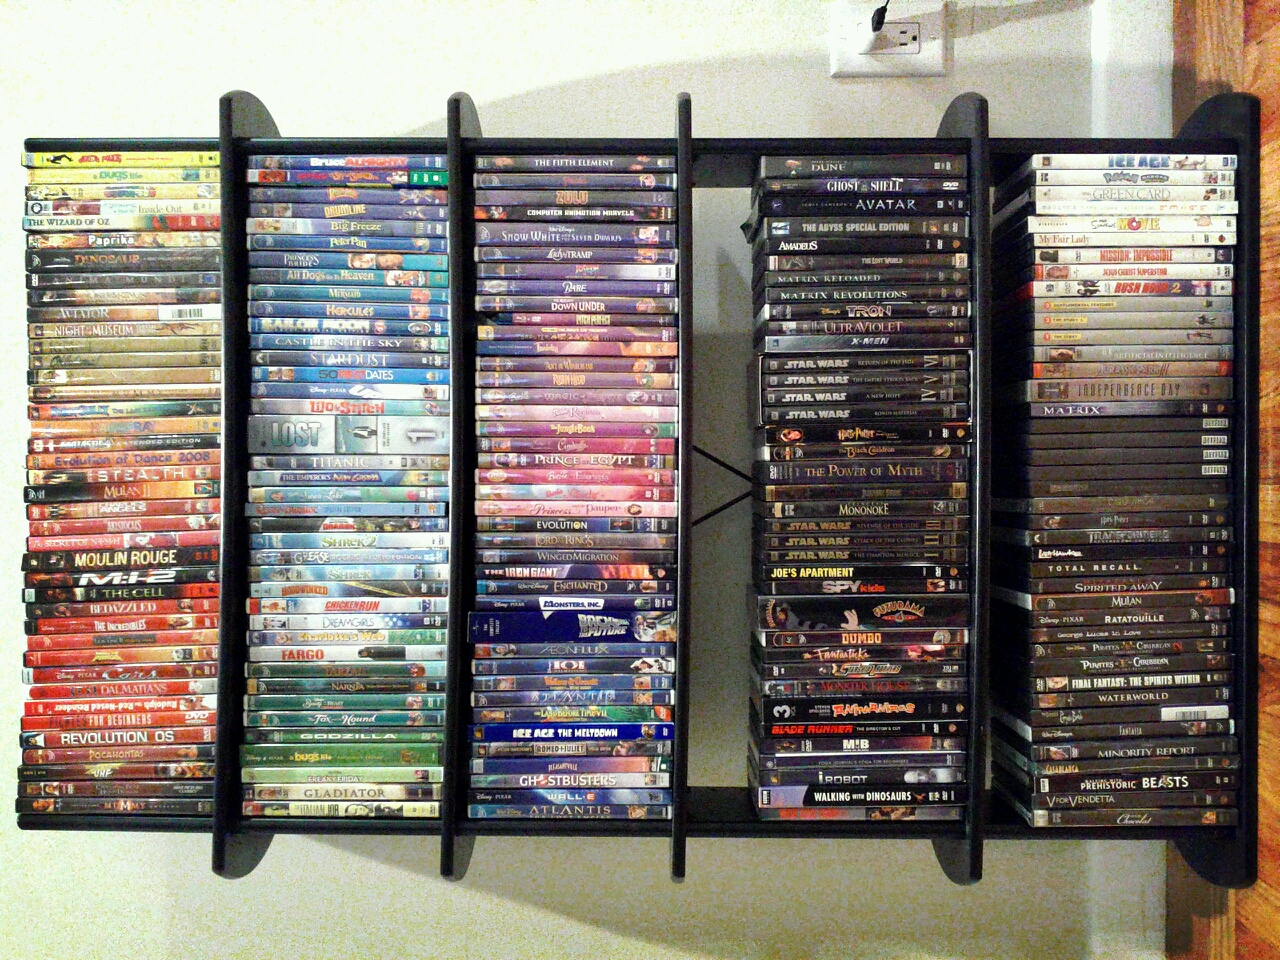 there is a book shelf with some movies